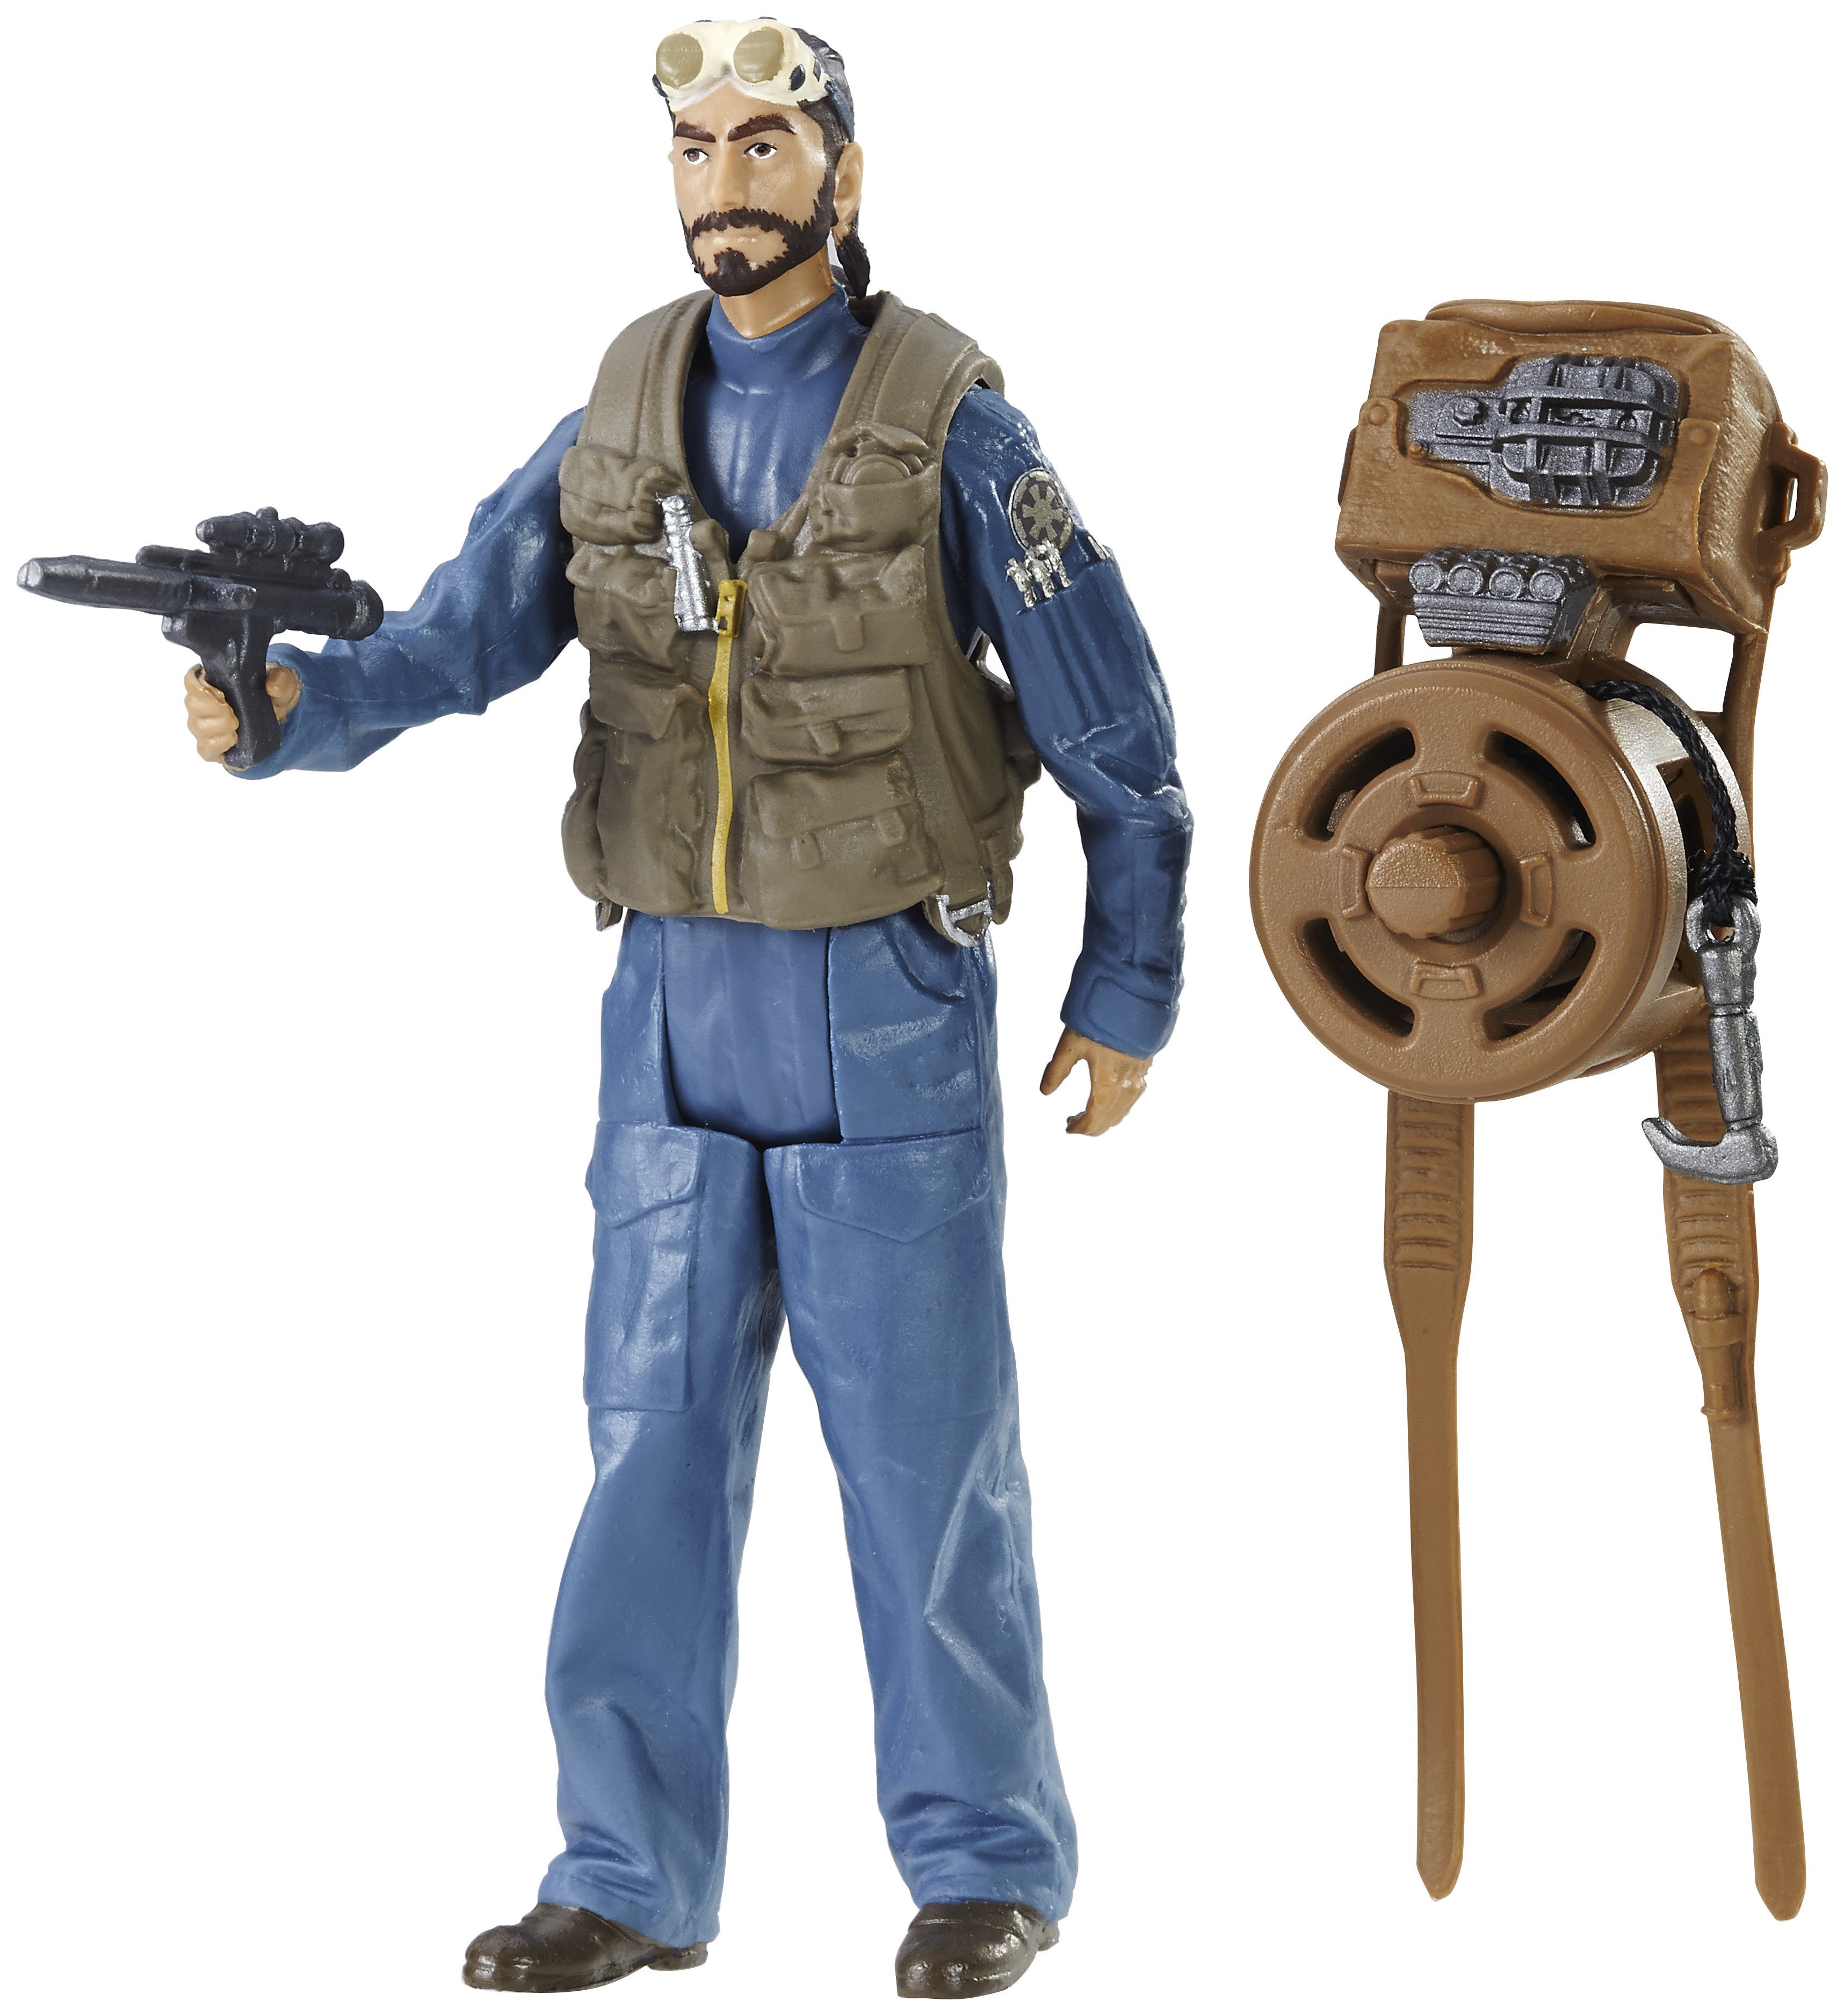 Star Wars Rogue One Bodhi Rook. Ages 4 and up